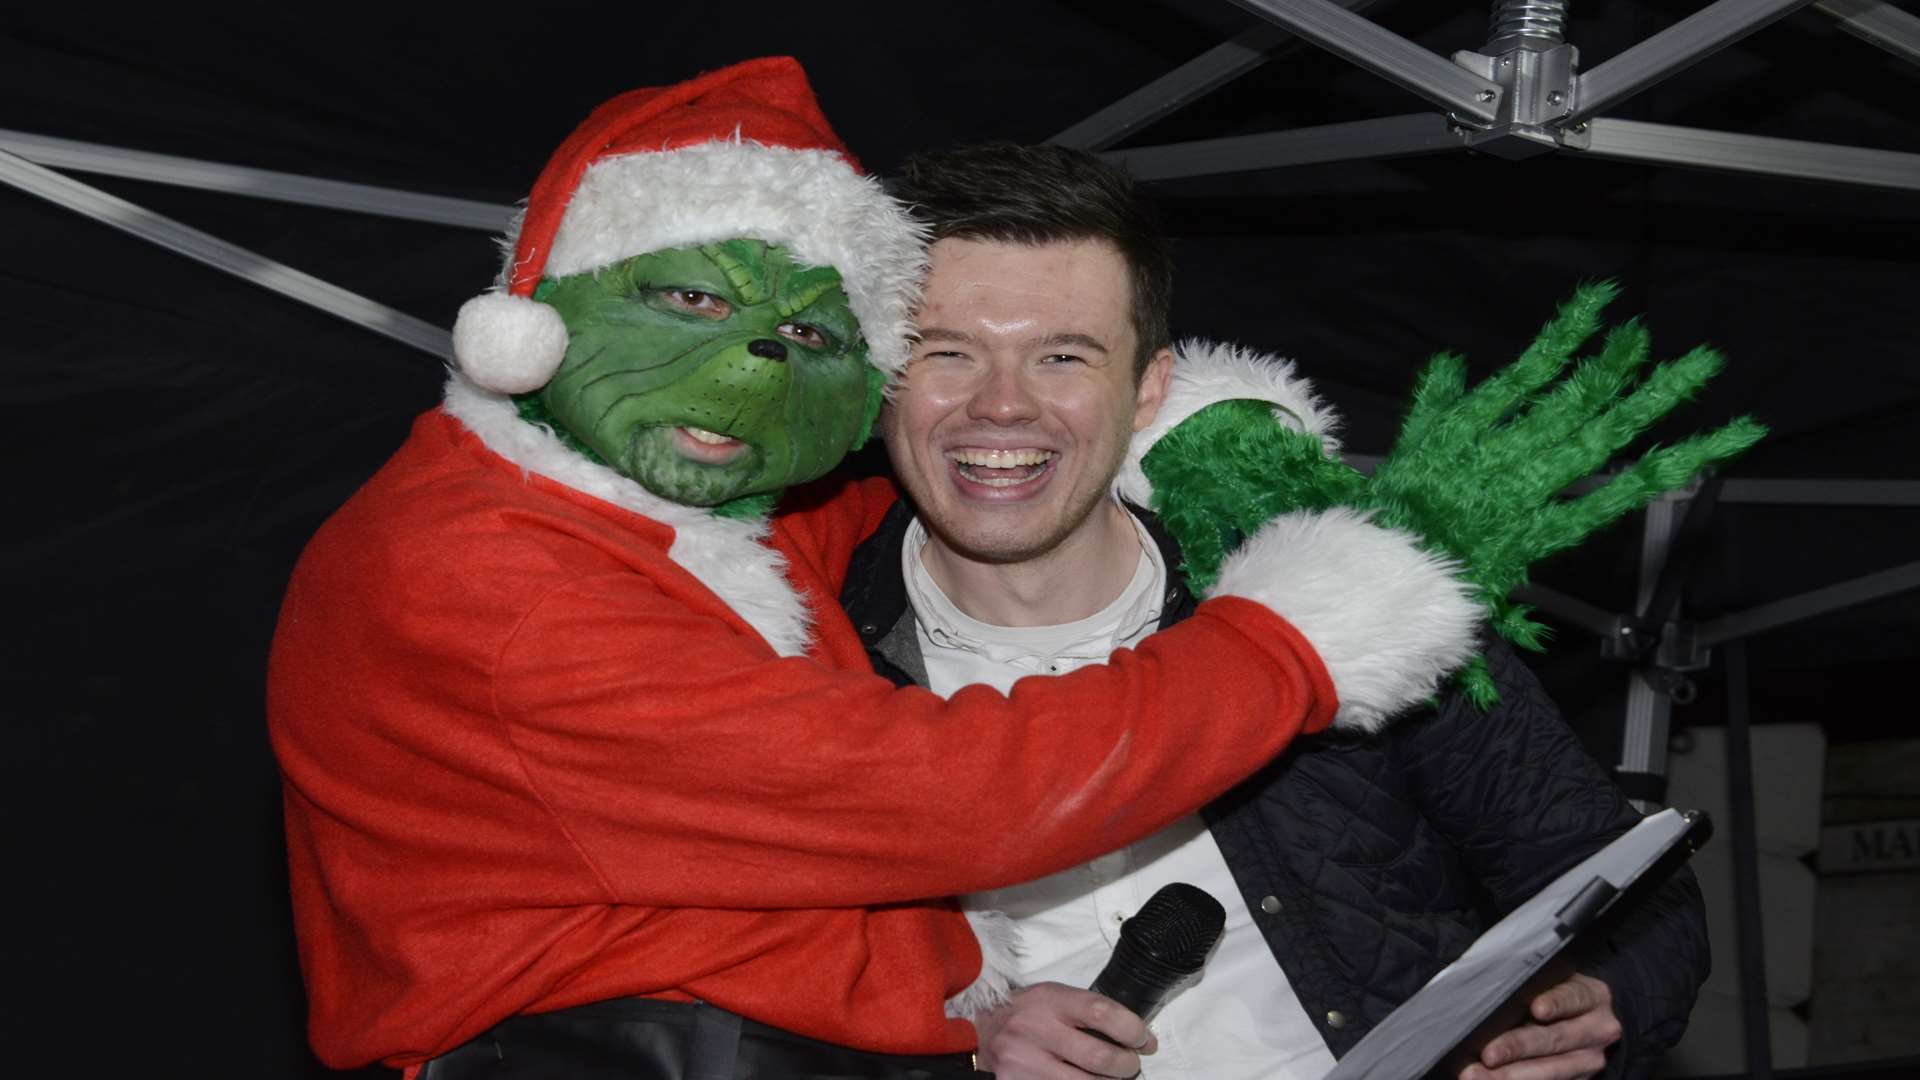 kmfm's Glen Scott in a clinch with the Grinch Picture: Paul Amos